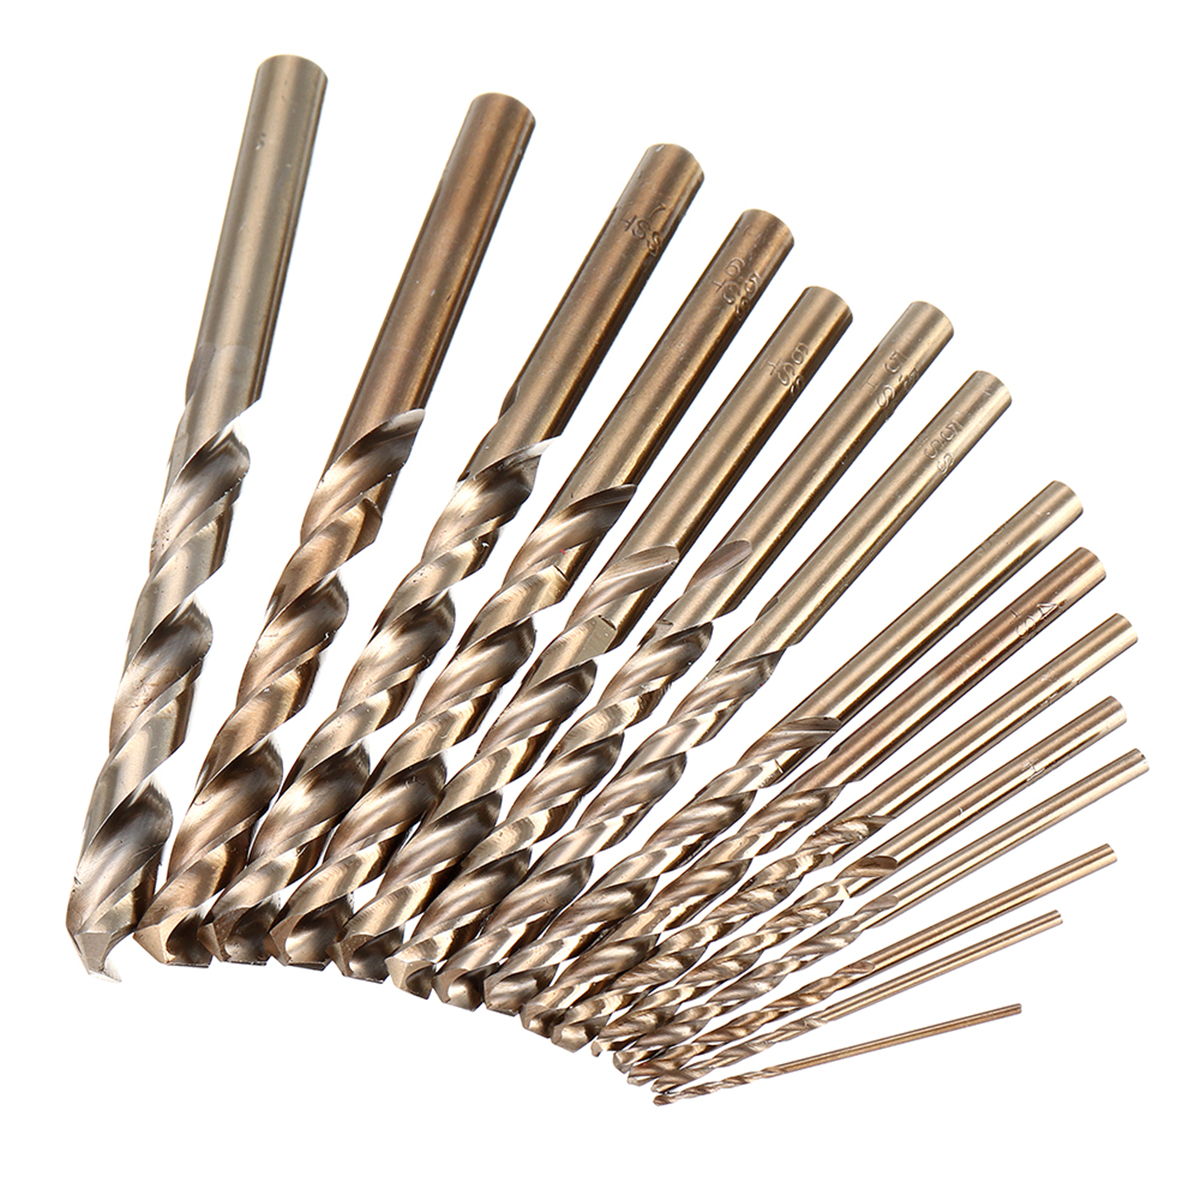 Find 13/19/25 PCS HSS 1 13mm Drillpro M35 Bit Set Cobalt Twist Drill Bit for Sale on Gipsybee.com with cryptocurrencies